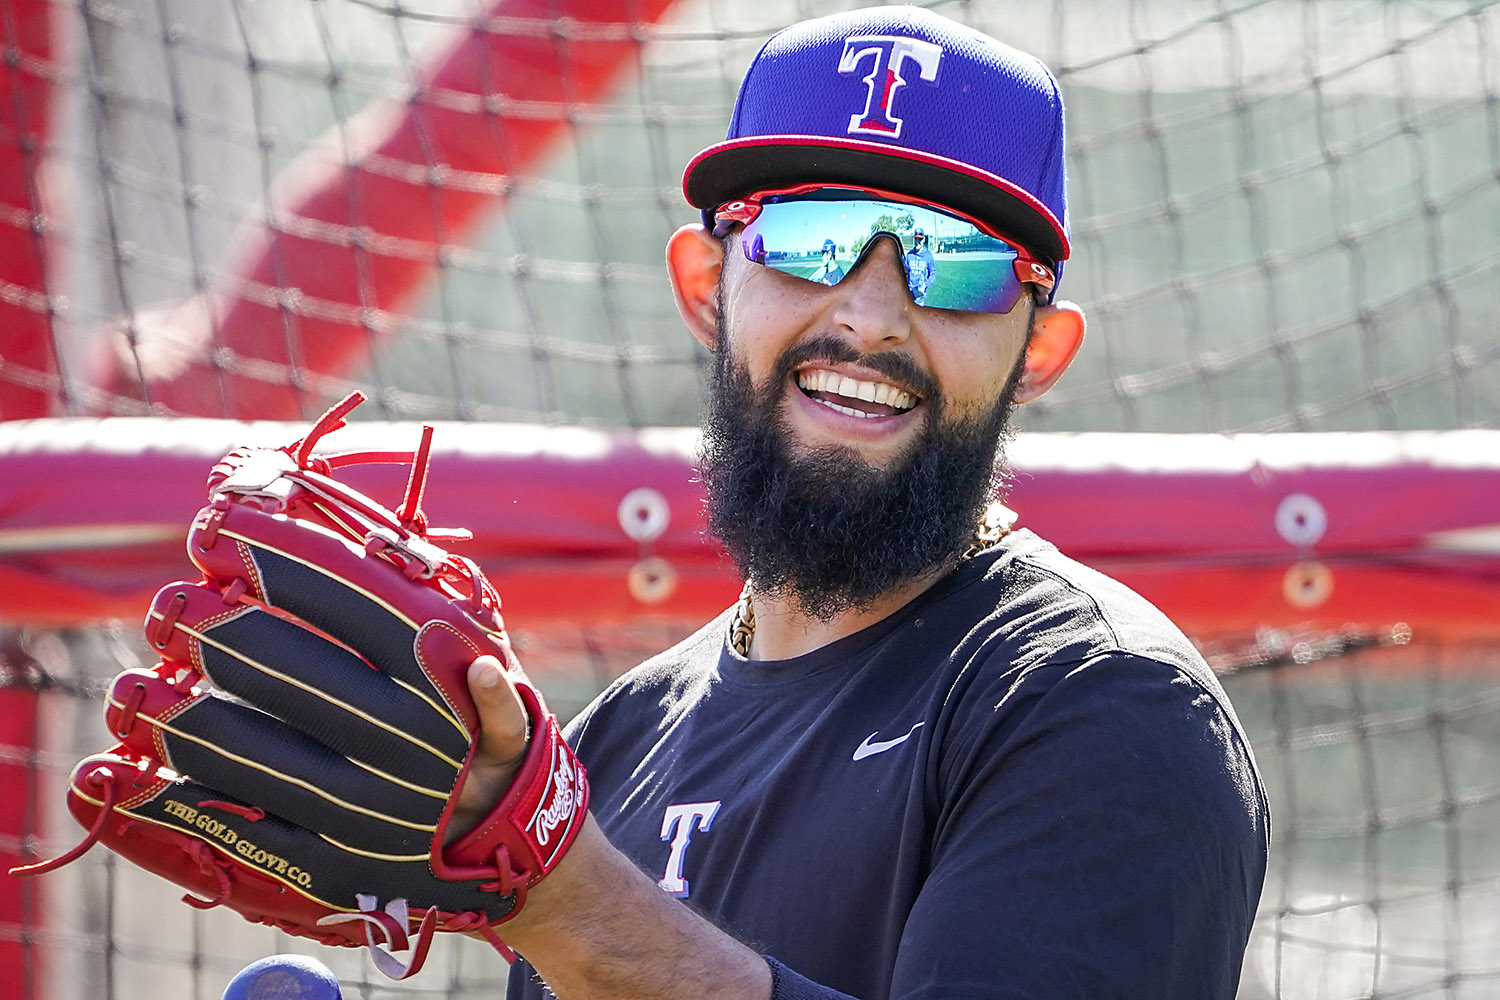 Rougned Odor may be the single most important player at Rangers